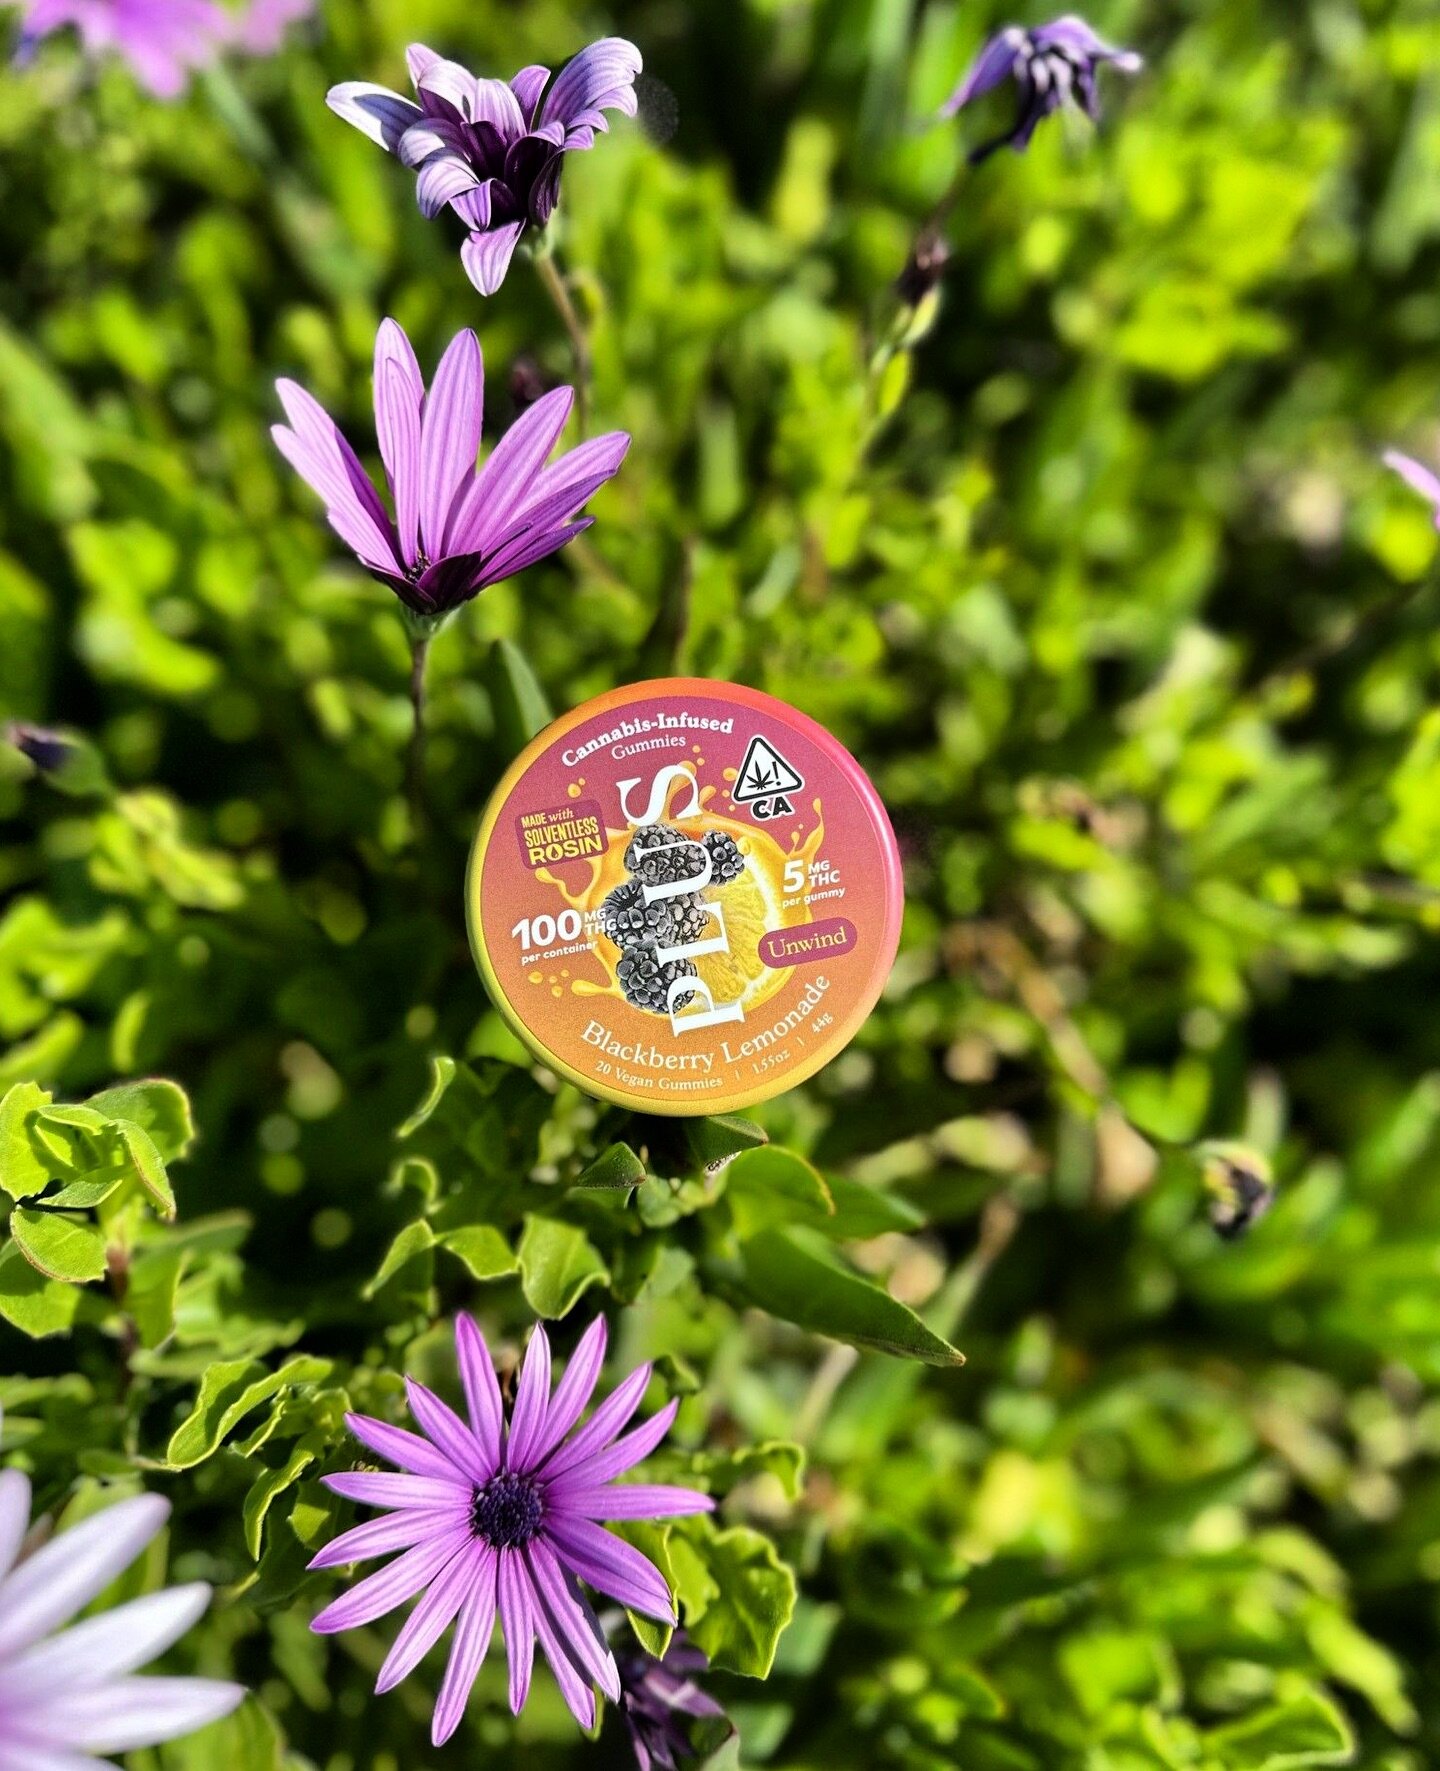 As the flowers bloom, so does your relaxation routine! Indulge in the yummy taste of PLUS Blackberry Lemonade gummies 🌸⁠

#springtime #flowersinbloom